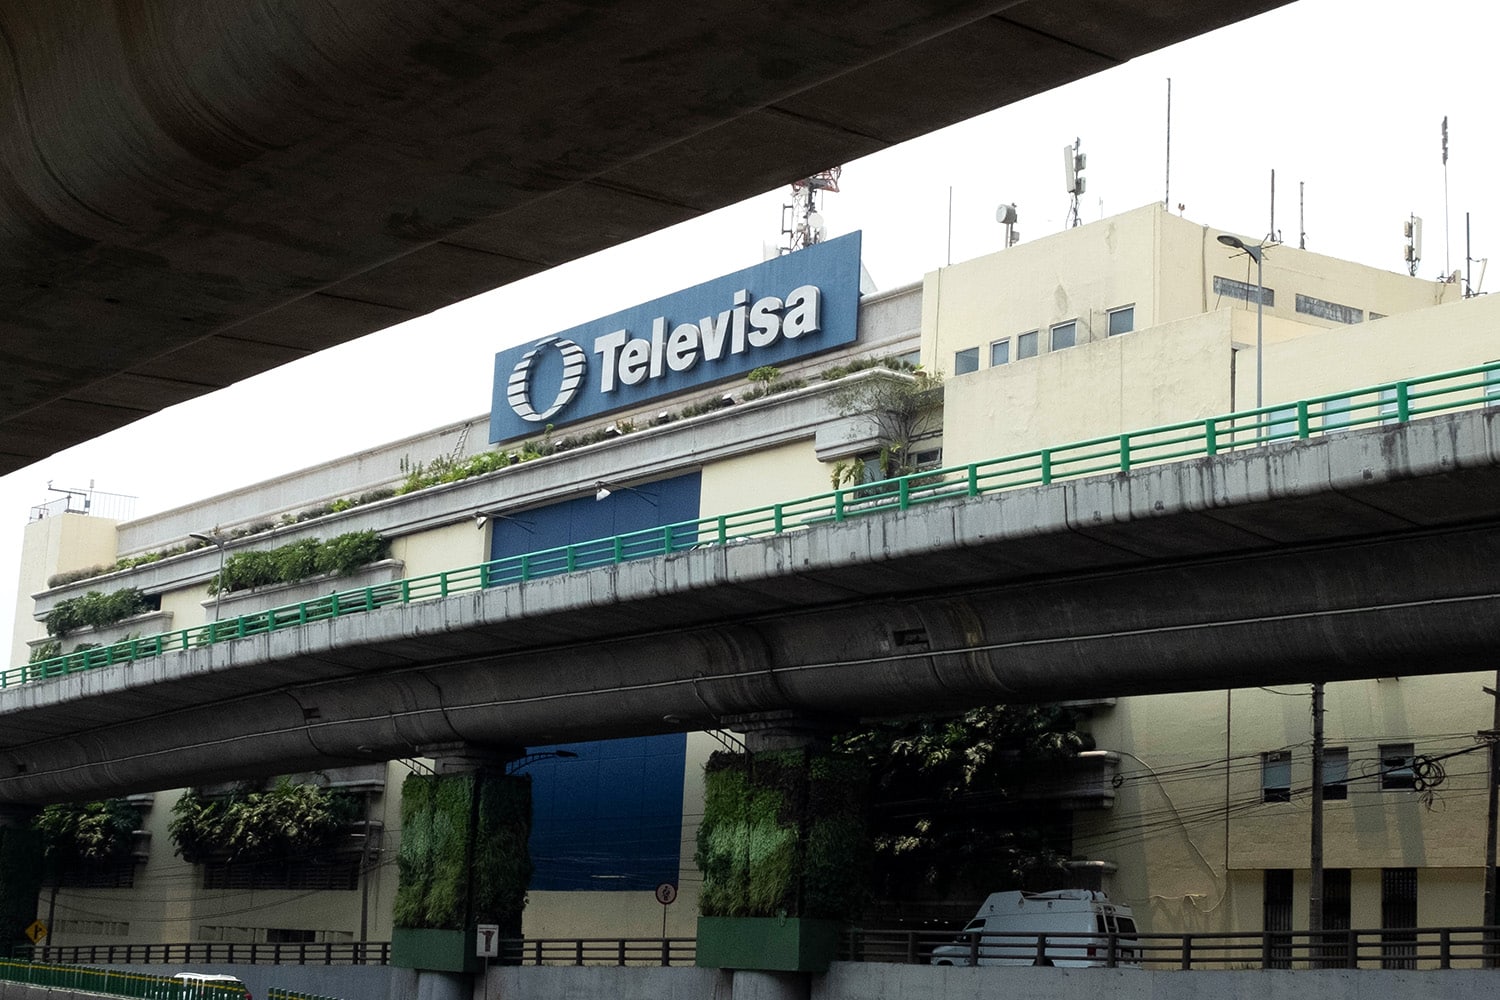 A view of a Televisa broadcasting building in Mexico City.